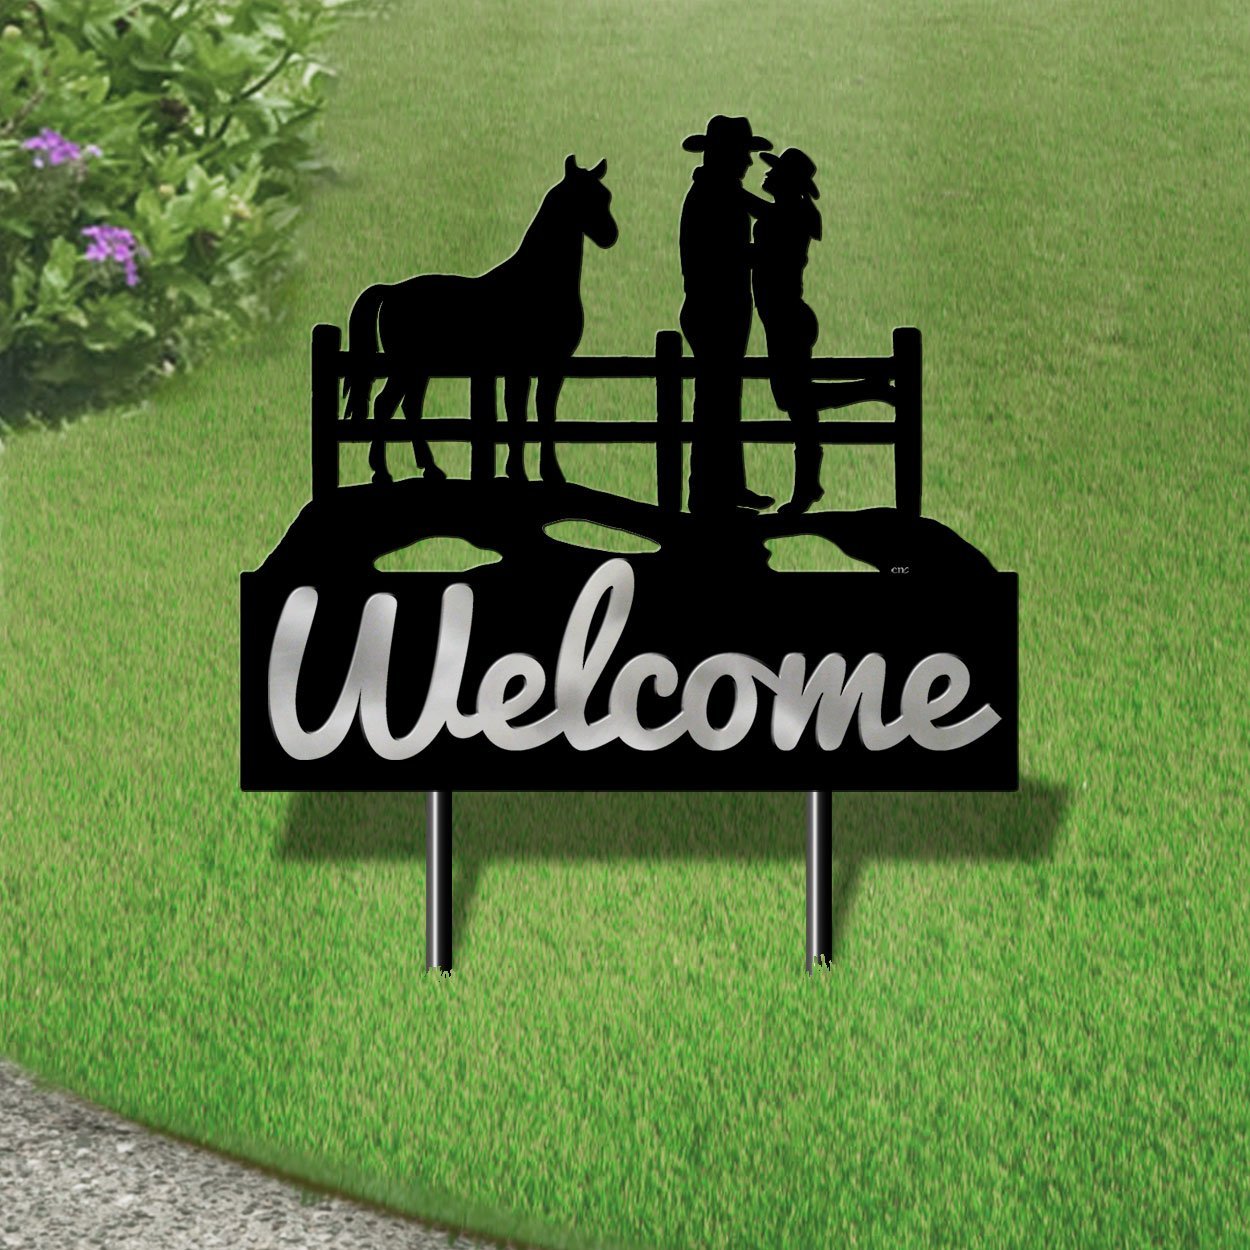 610118 - Large 25in Wide Cowboy Couple with Horse Design Horizontal Metal Welcome Yard Sign